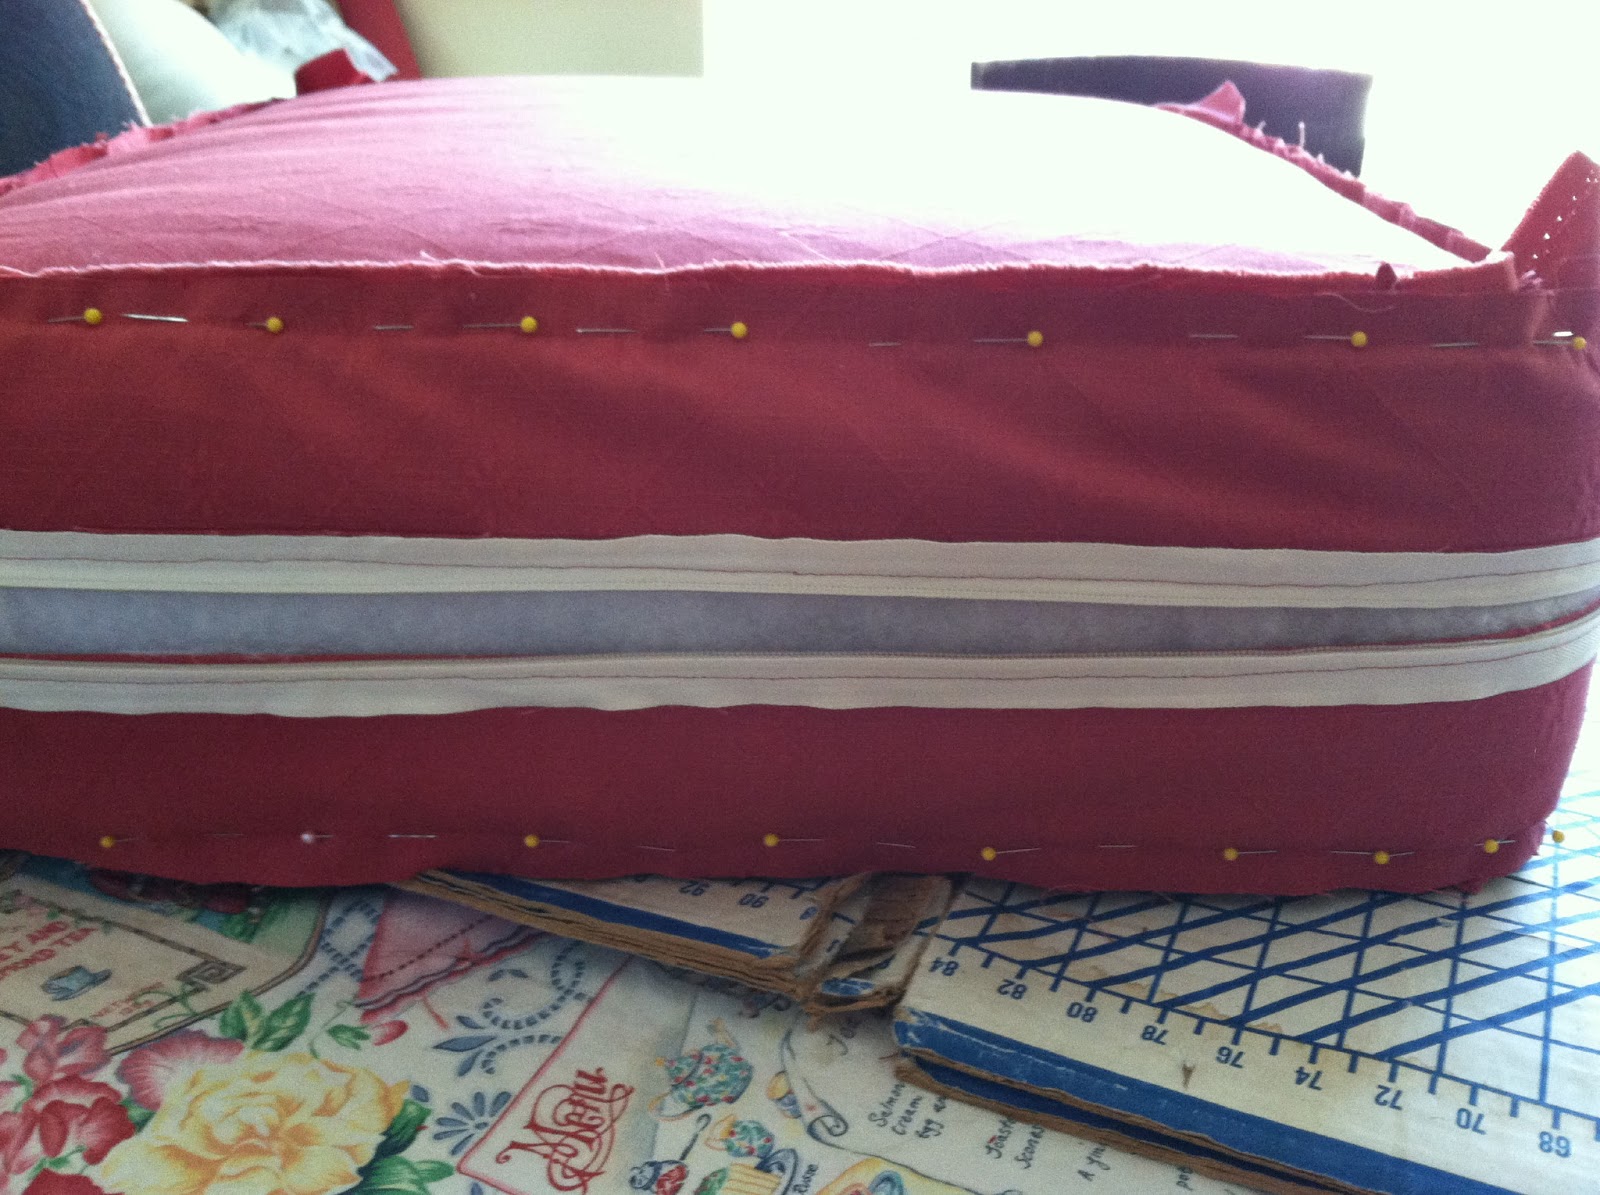 Goosegirl sews: The New Slipcover For The Old Ugly Sofa- Part 3